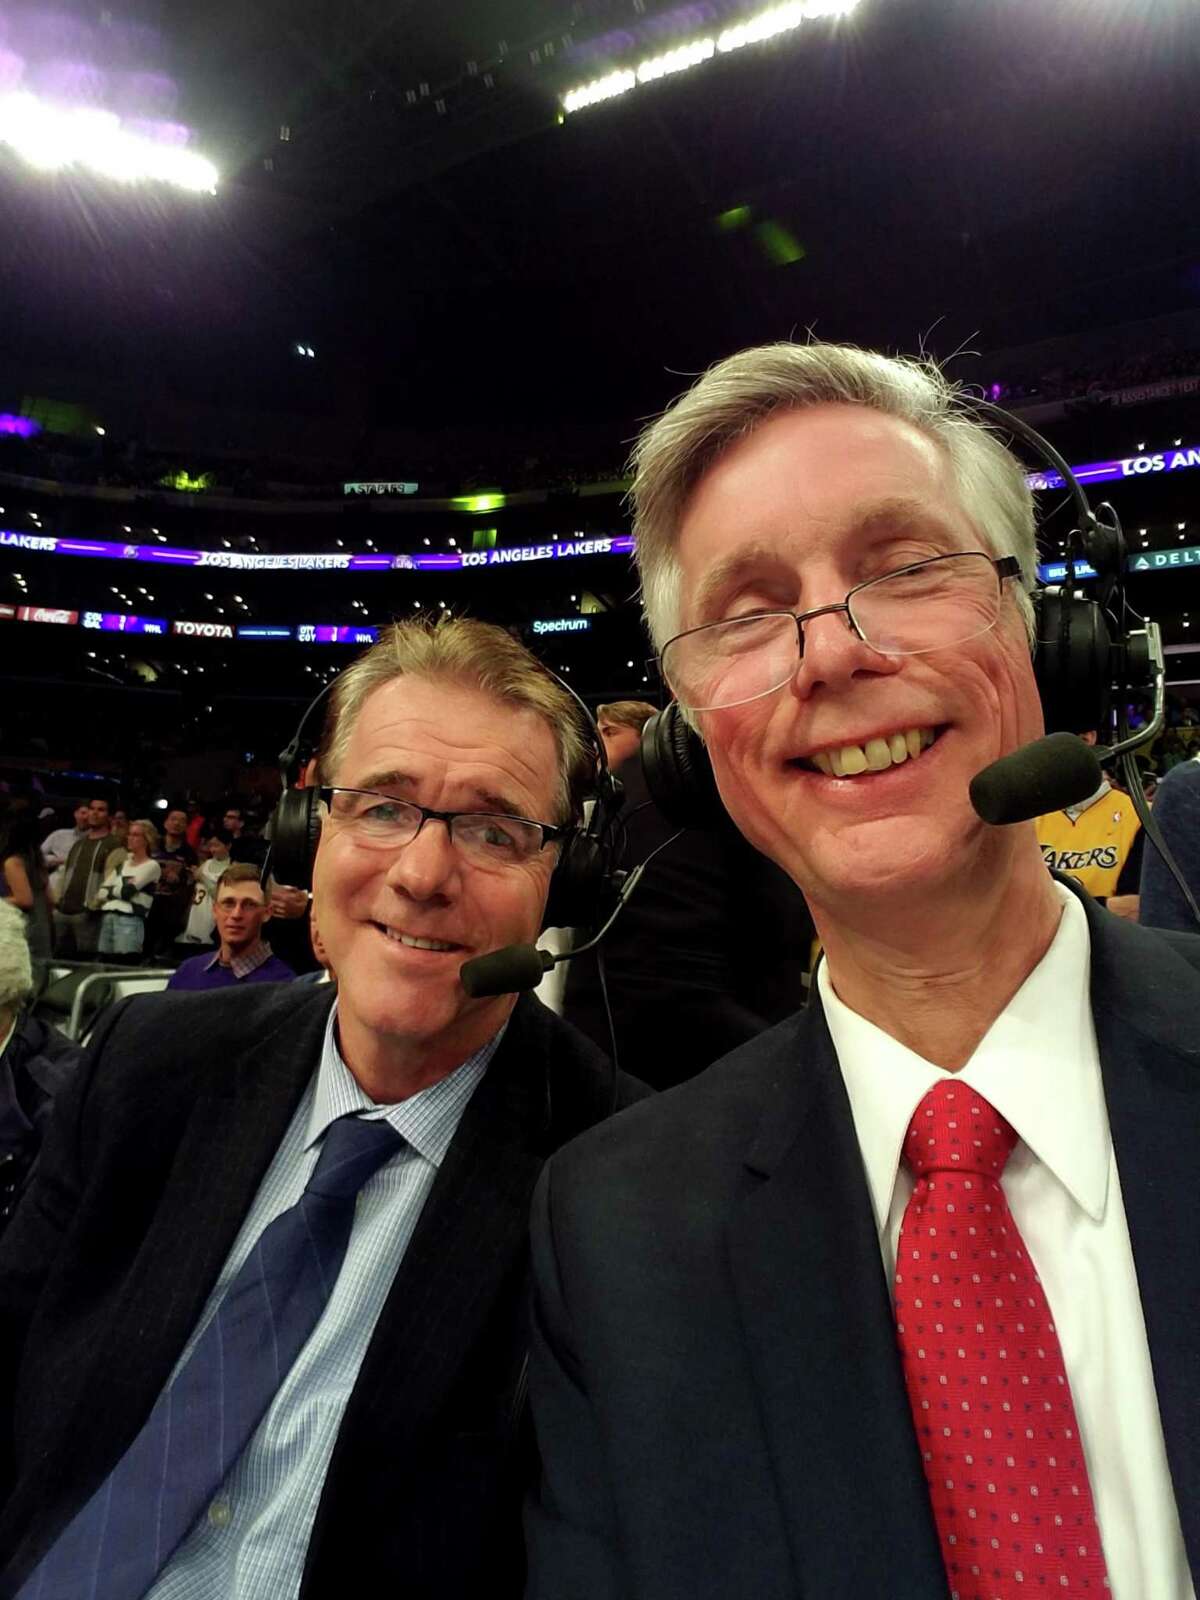 Bob Huessler and Tim Capstraw while working a Nets-Lakers game in Los Angeles.